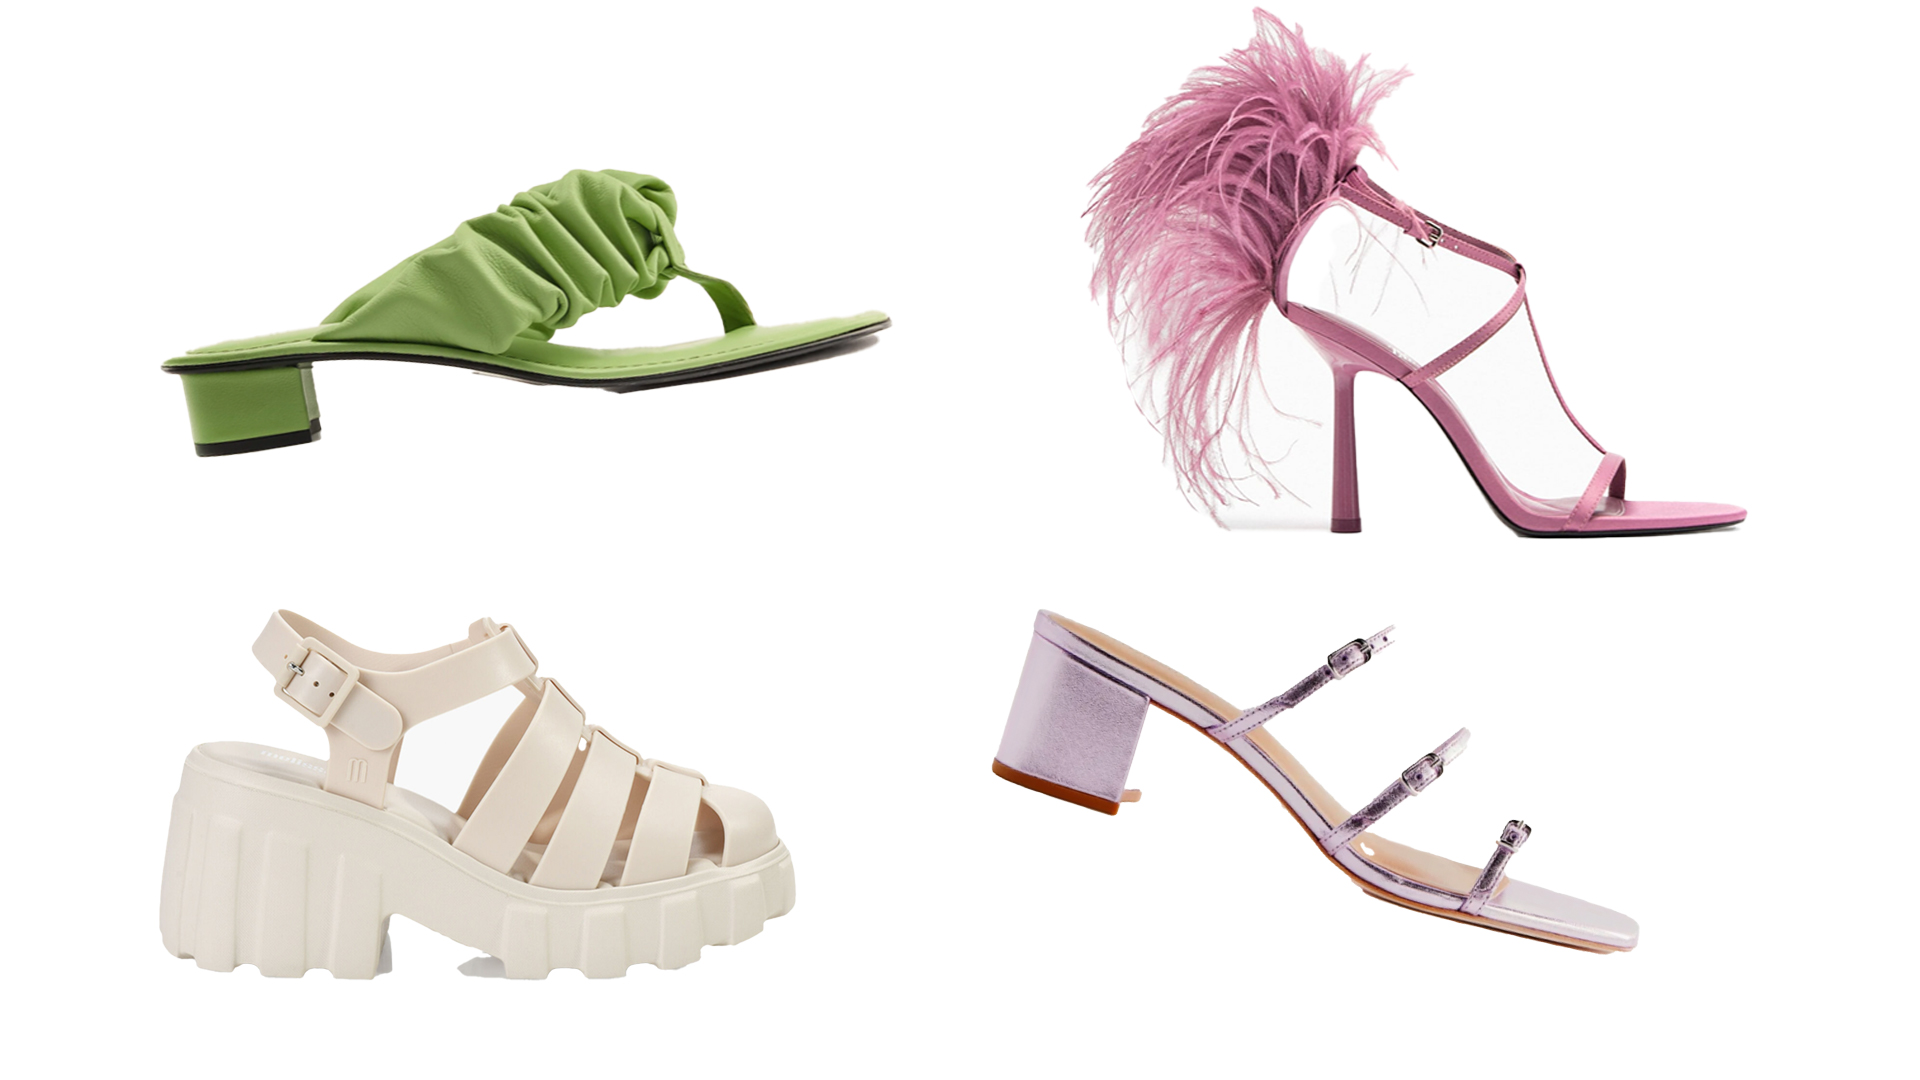 I. Introduction to Women's Shoe Trends